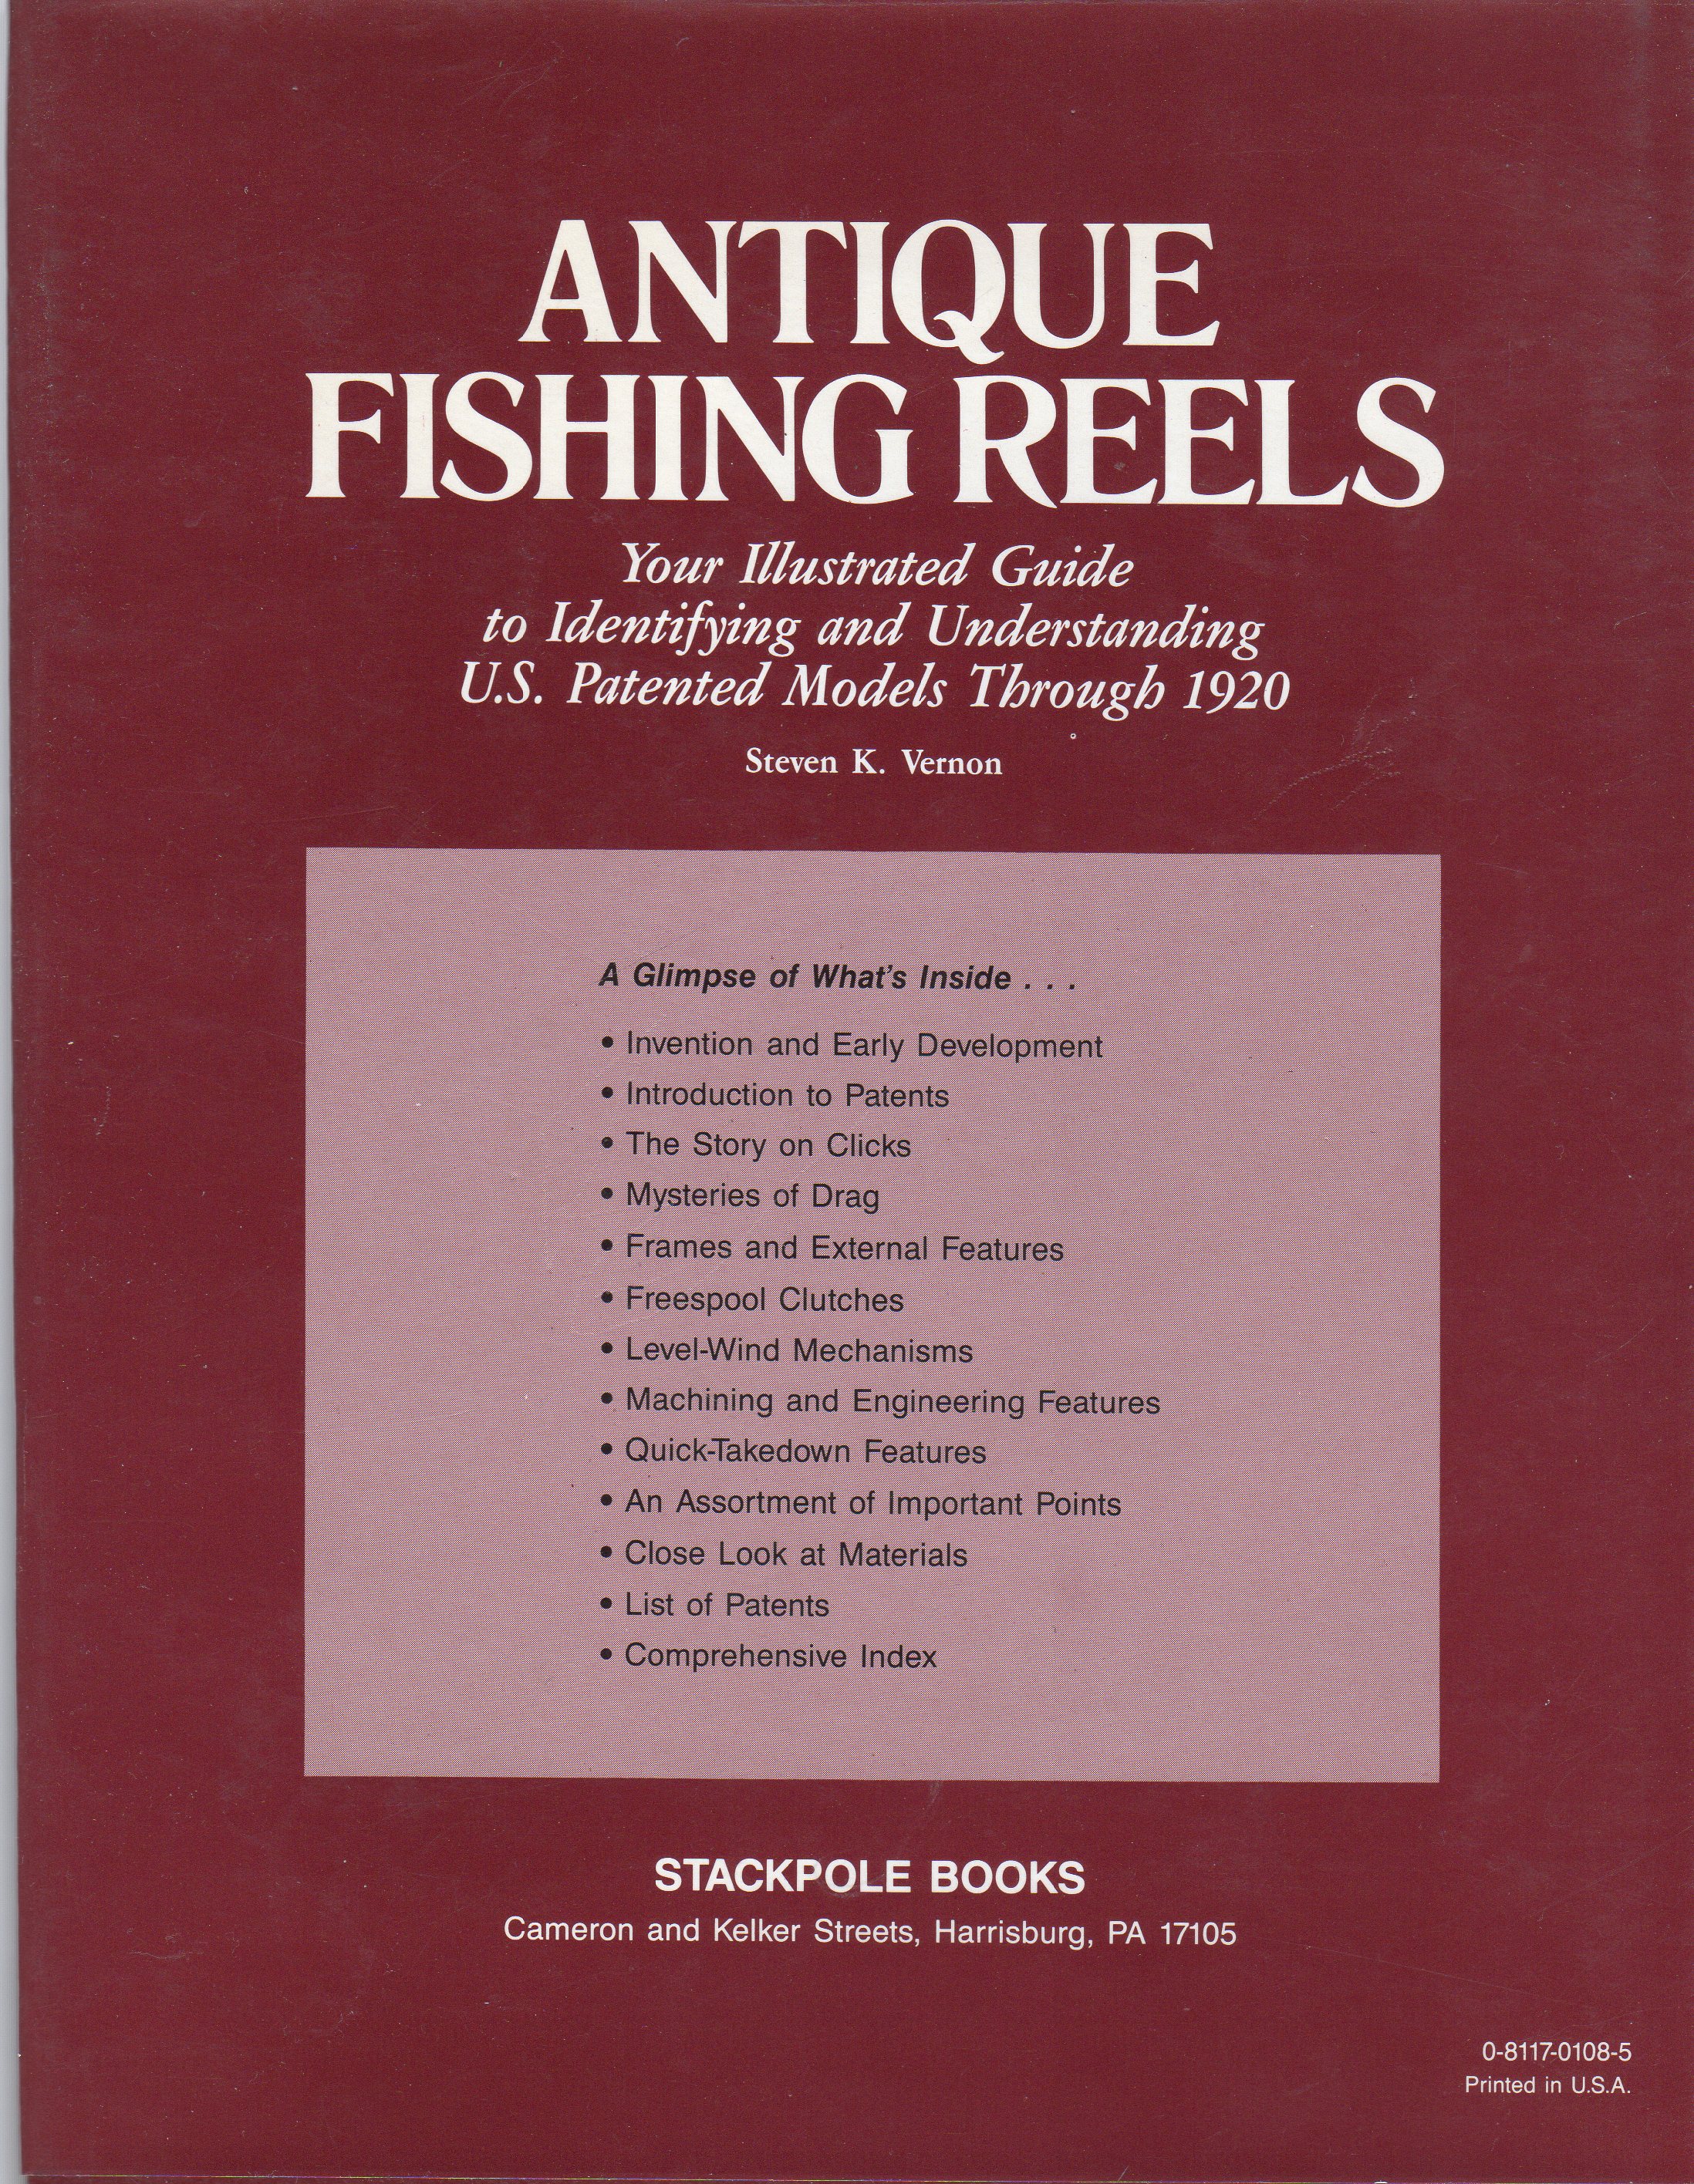 Antique Fishing Reels: Your Illustrated Guide to Identifying and